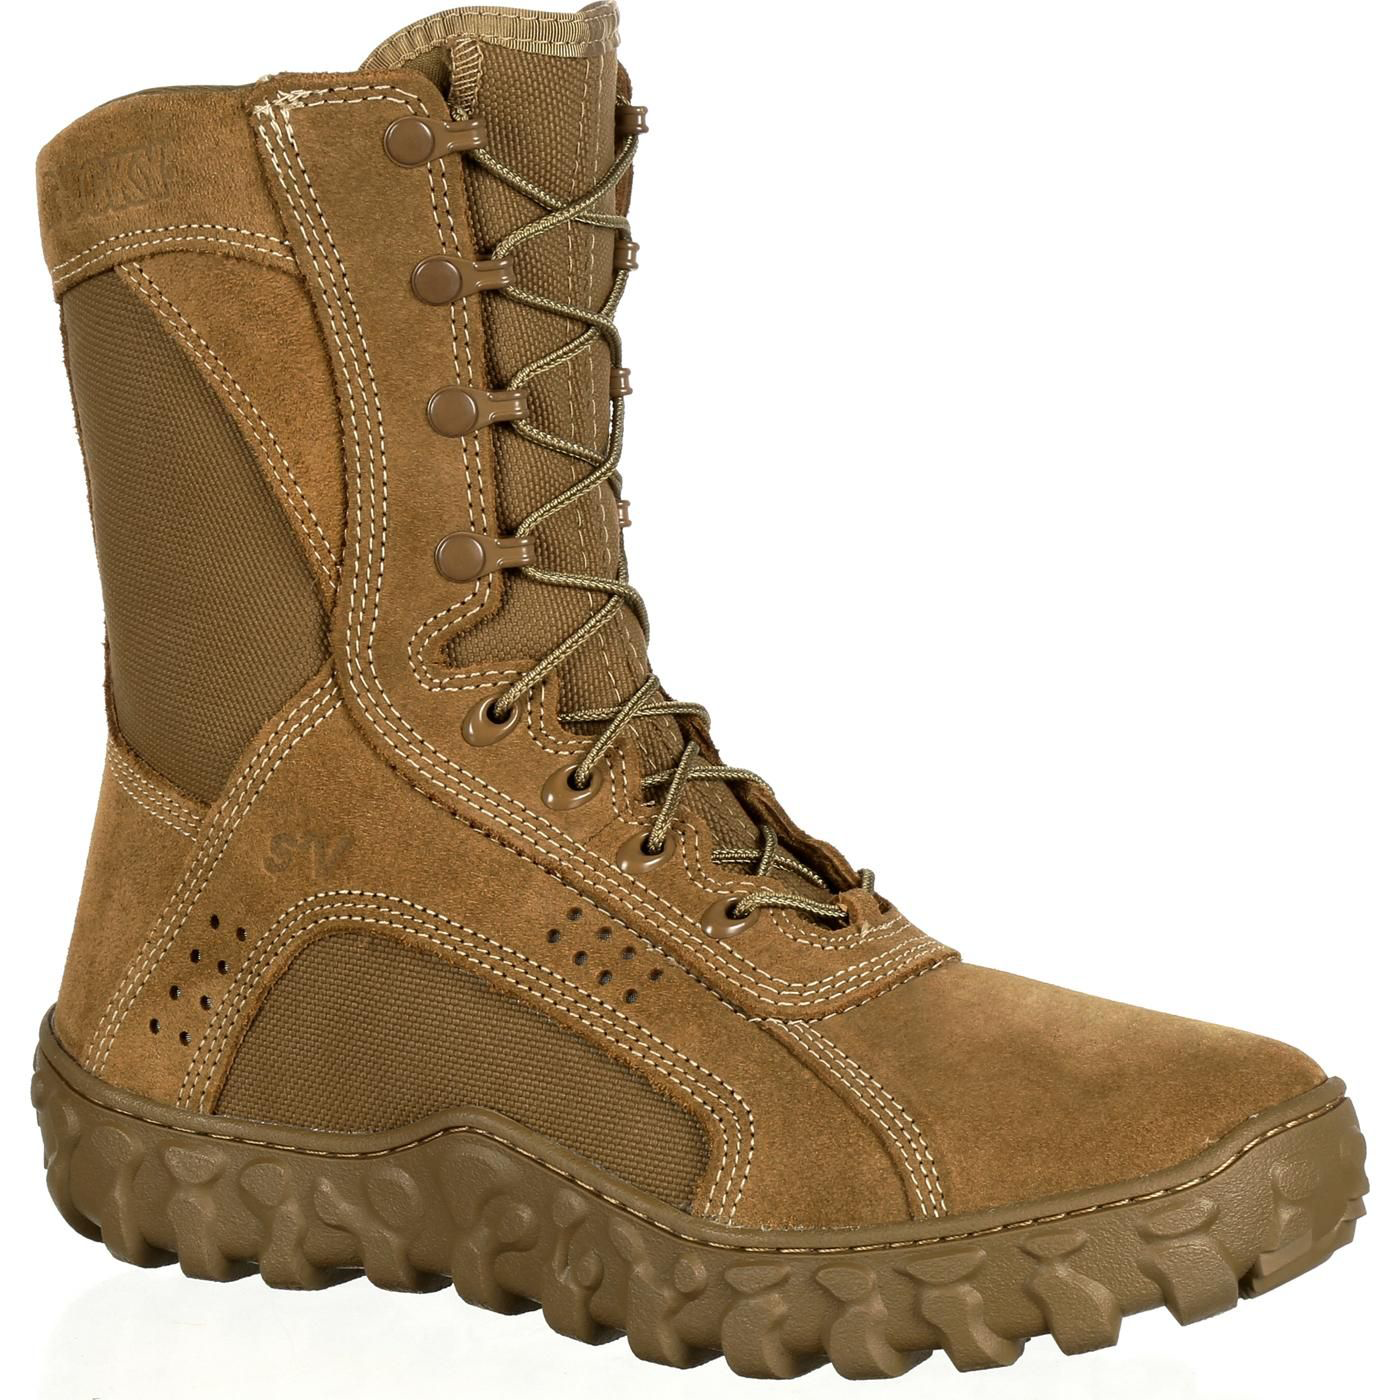 Rocky S2V Tactical Military Boots for Men - Coyote Brown - 8W